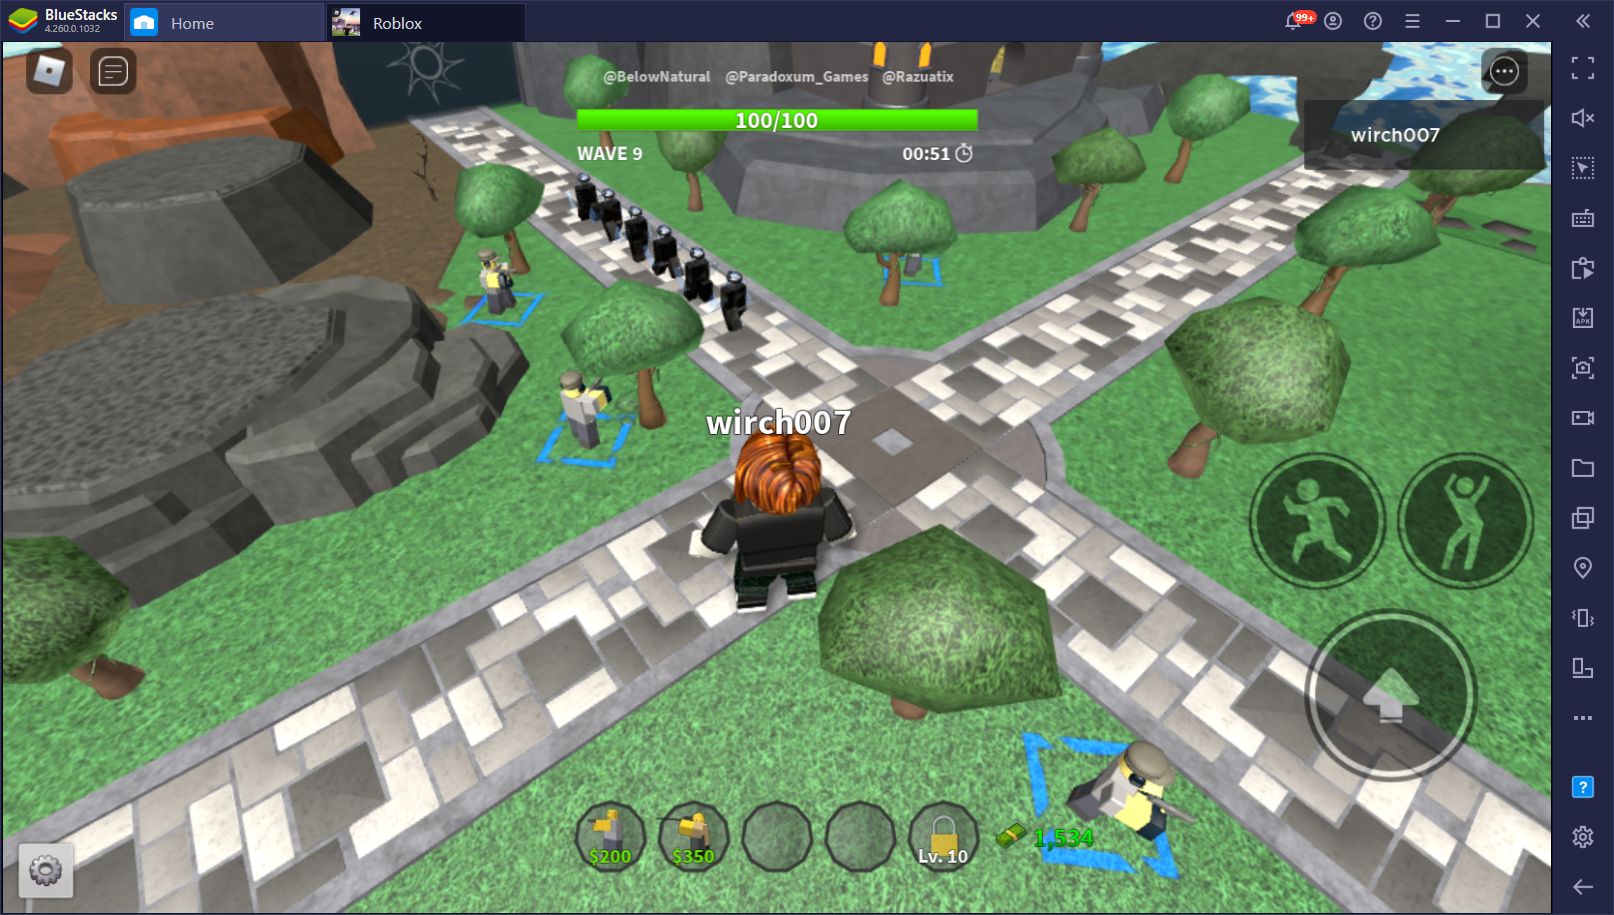 The Best Roblox Games To Play In 2021 Bluestacks - best roblox games ever made